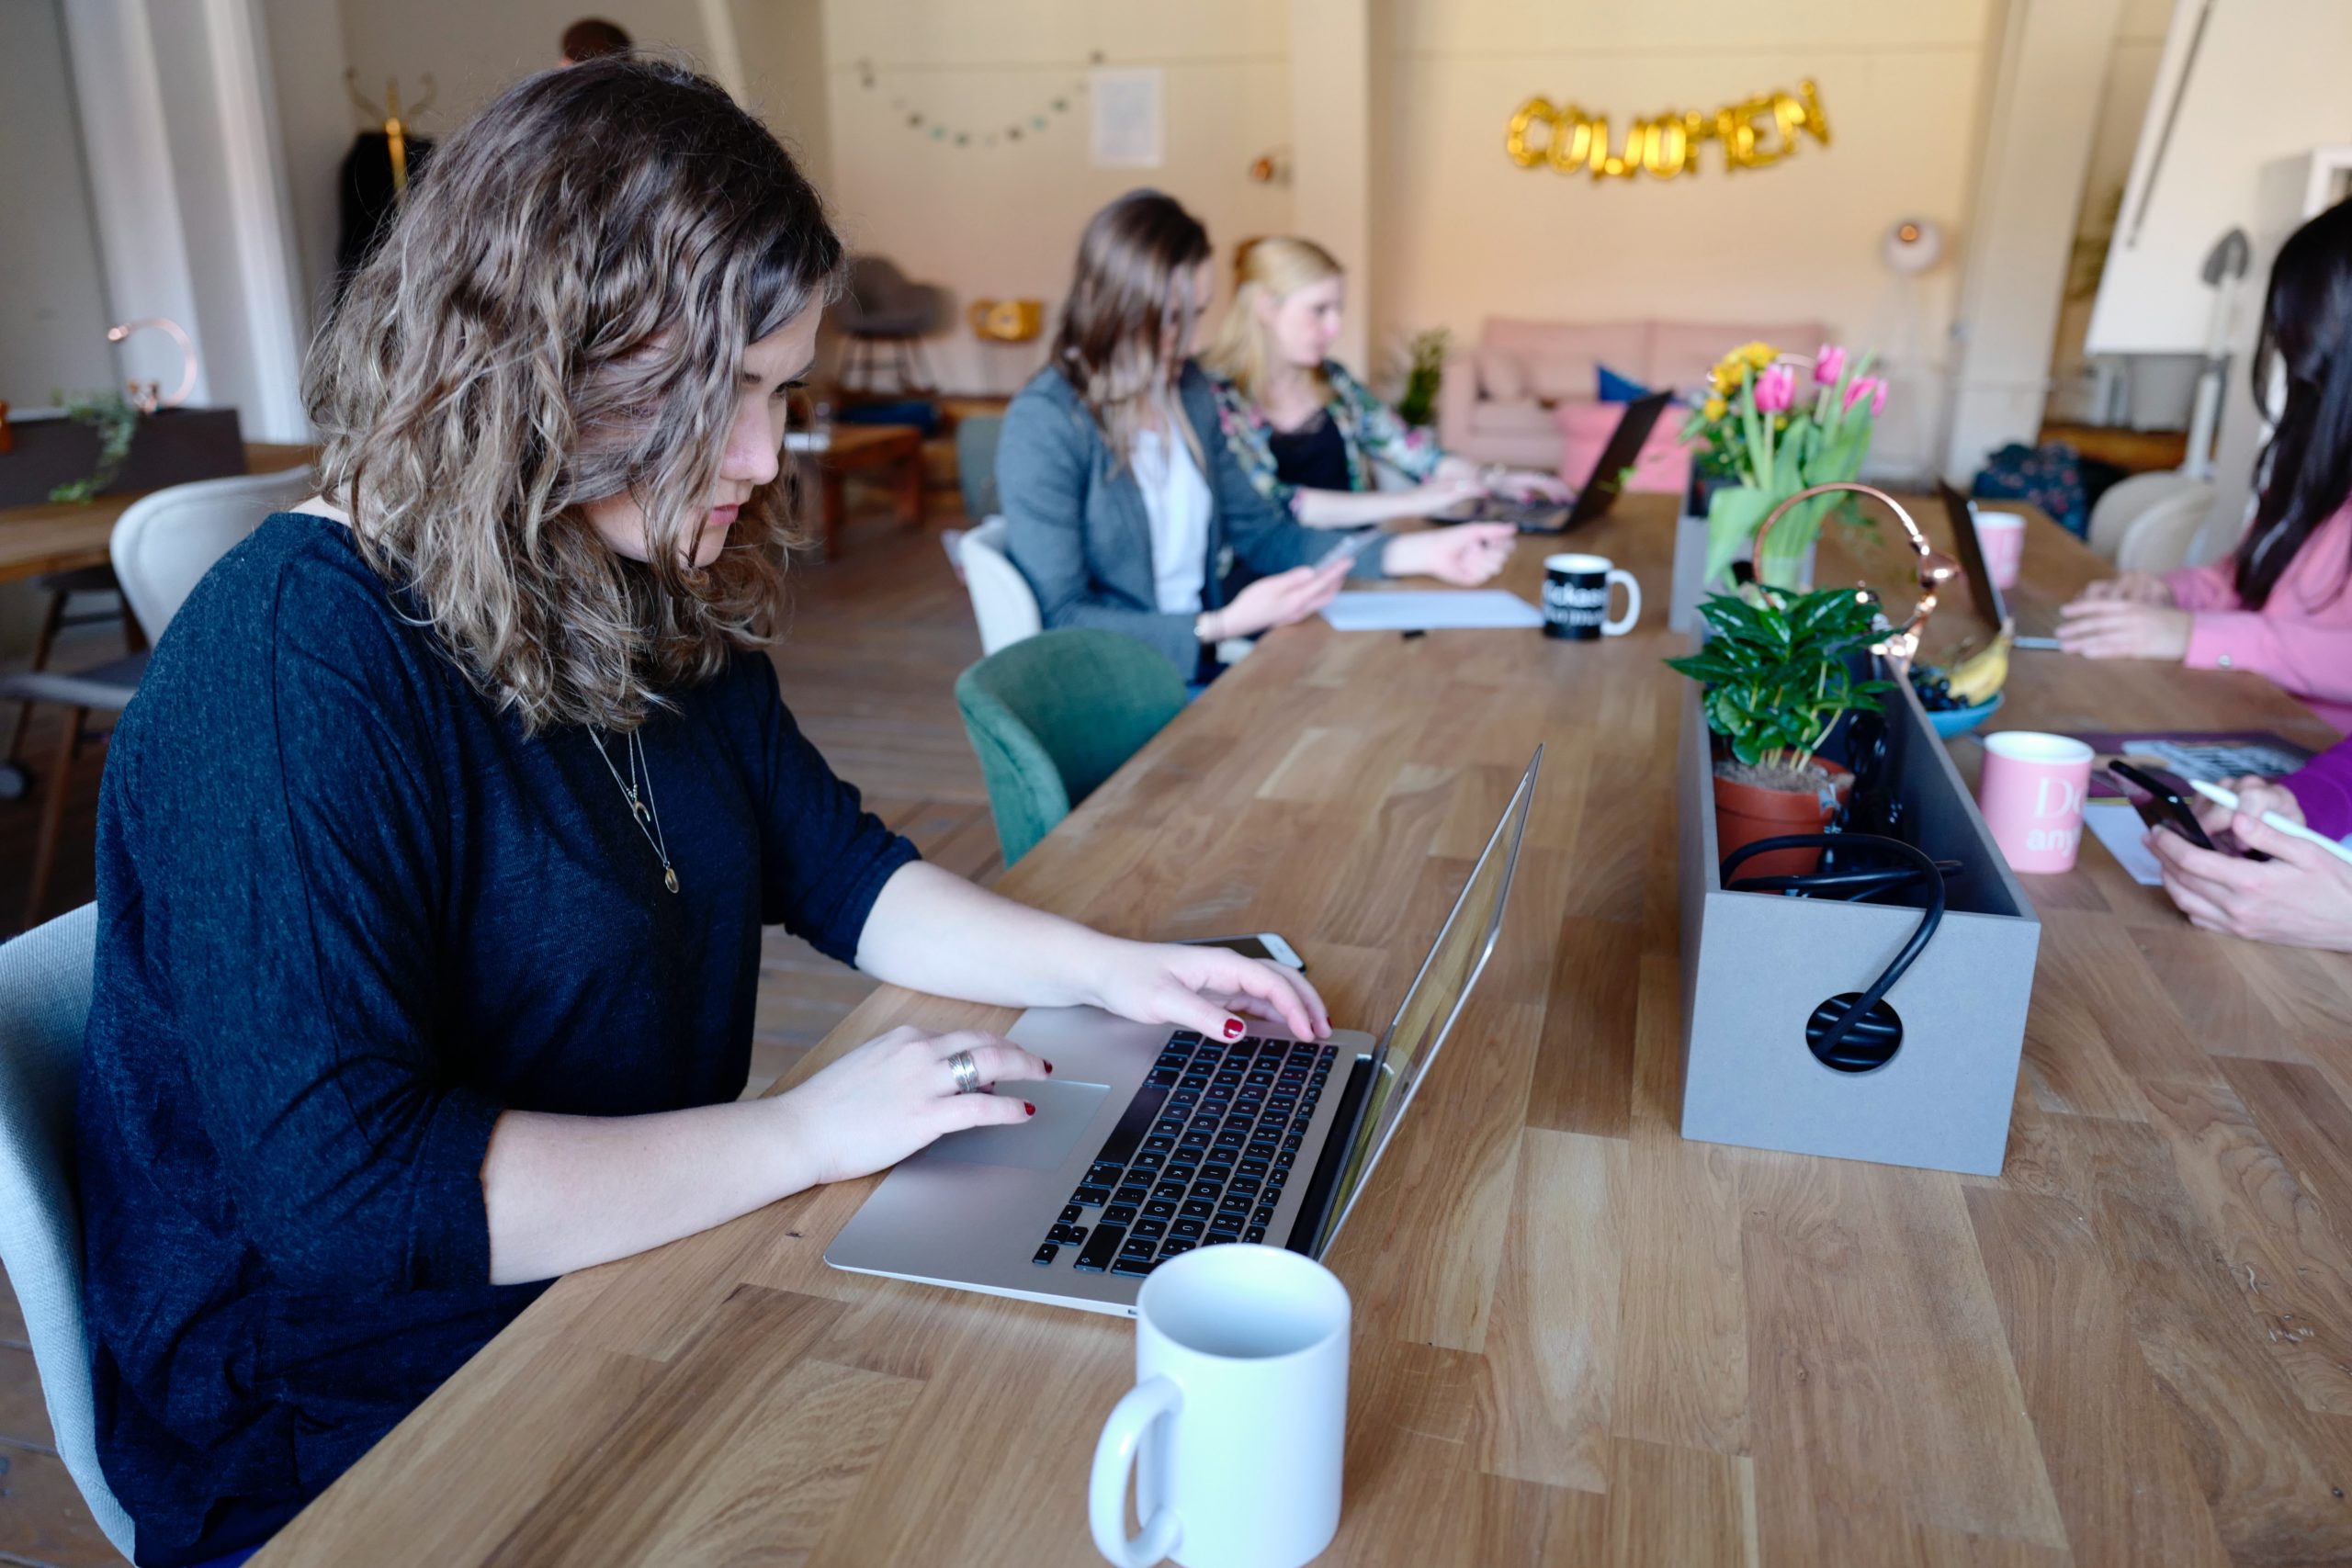 5 women working on laptops around a large desk - decorative image - coworking trends blog